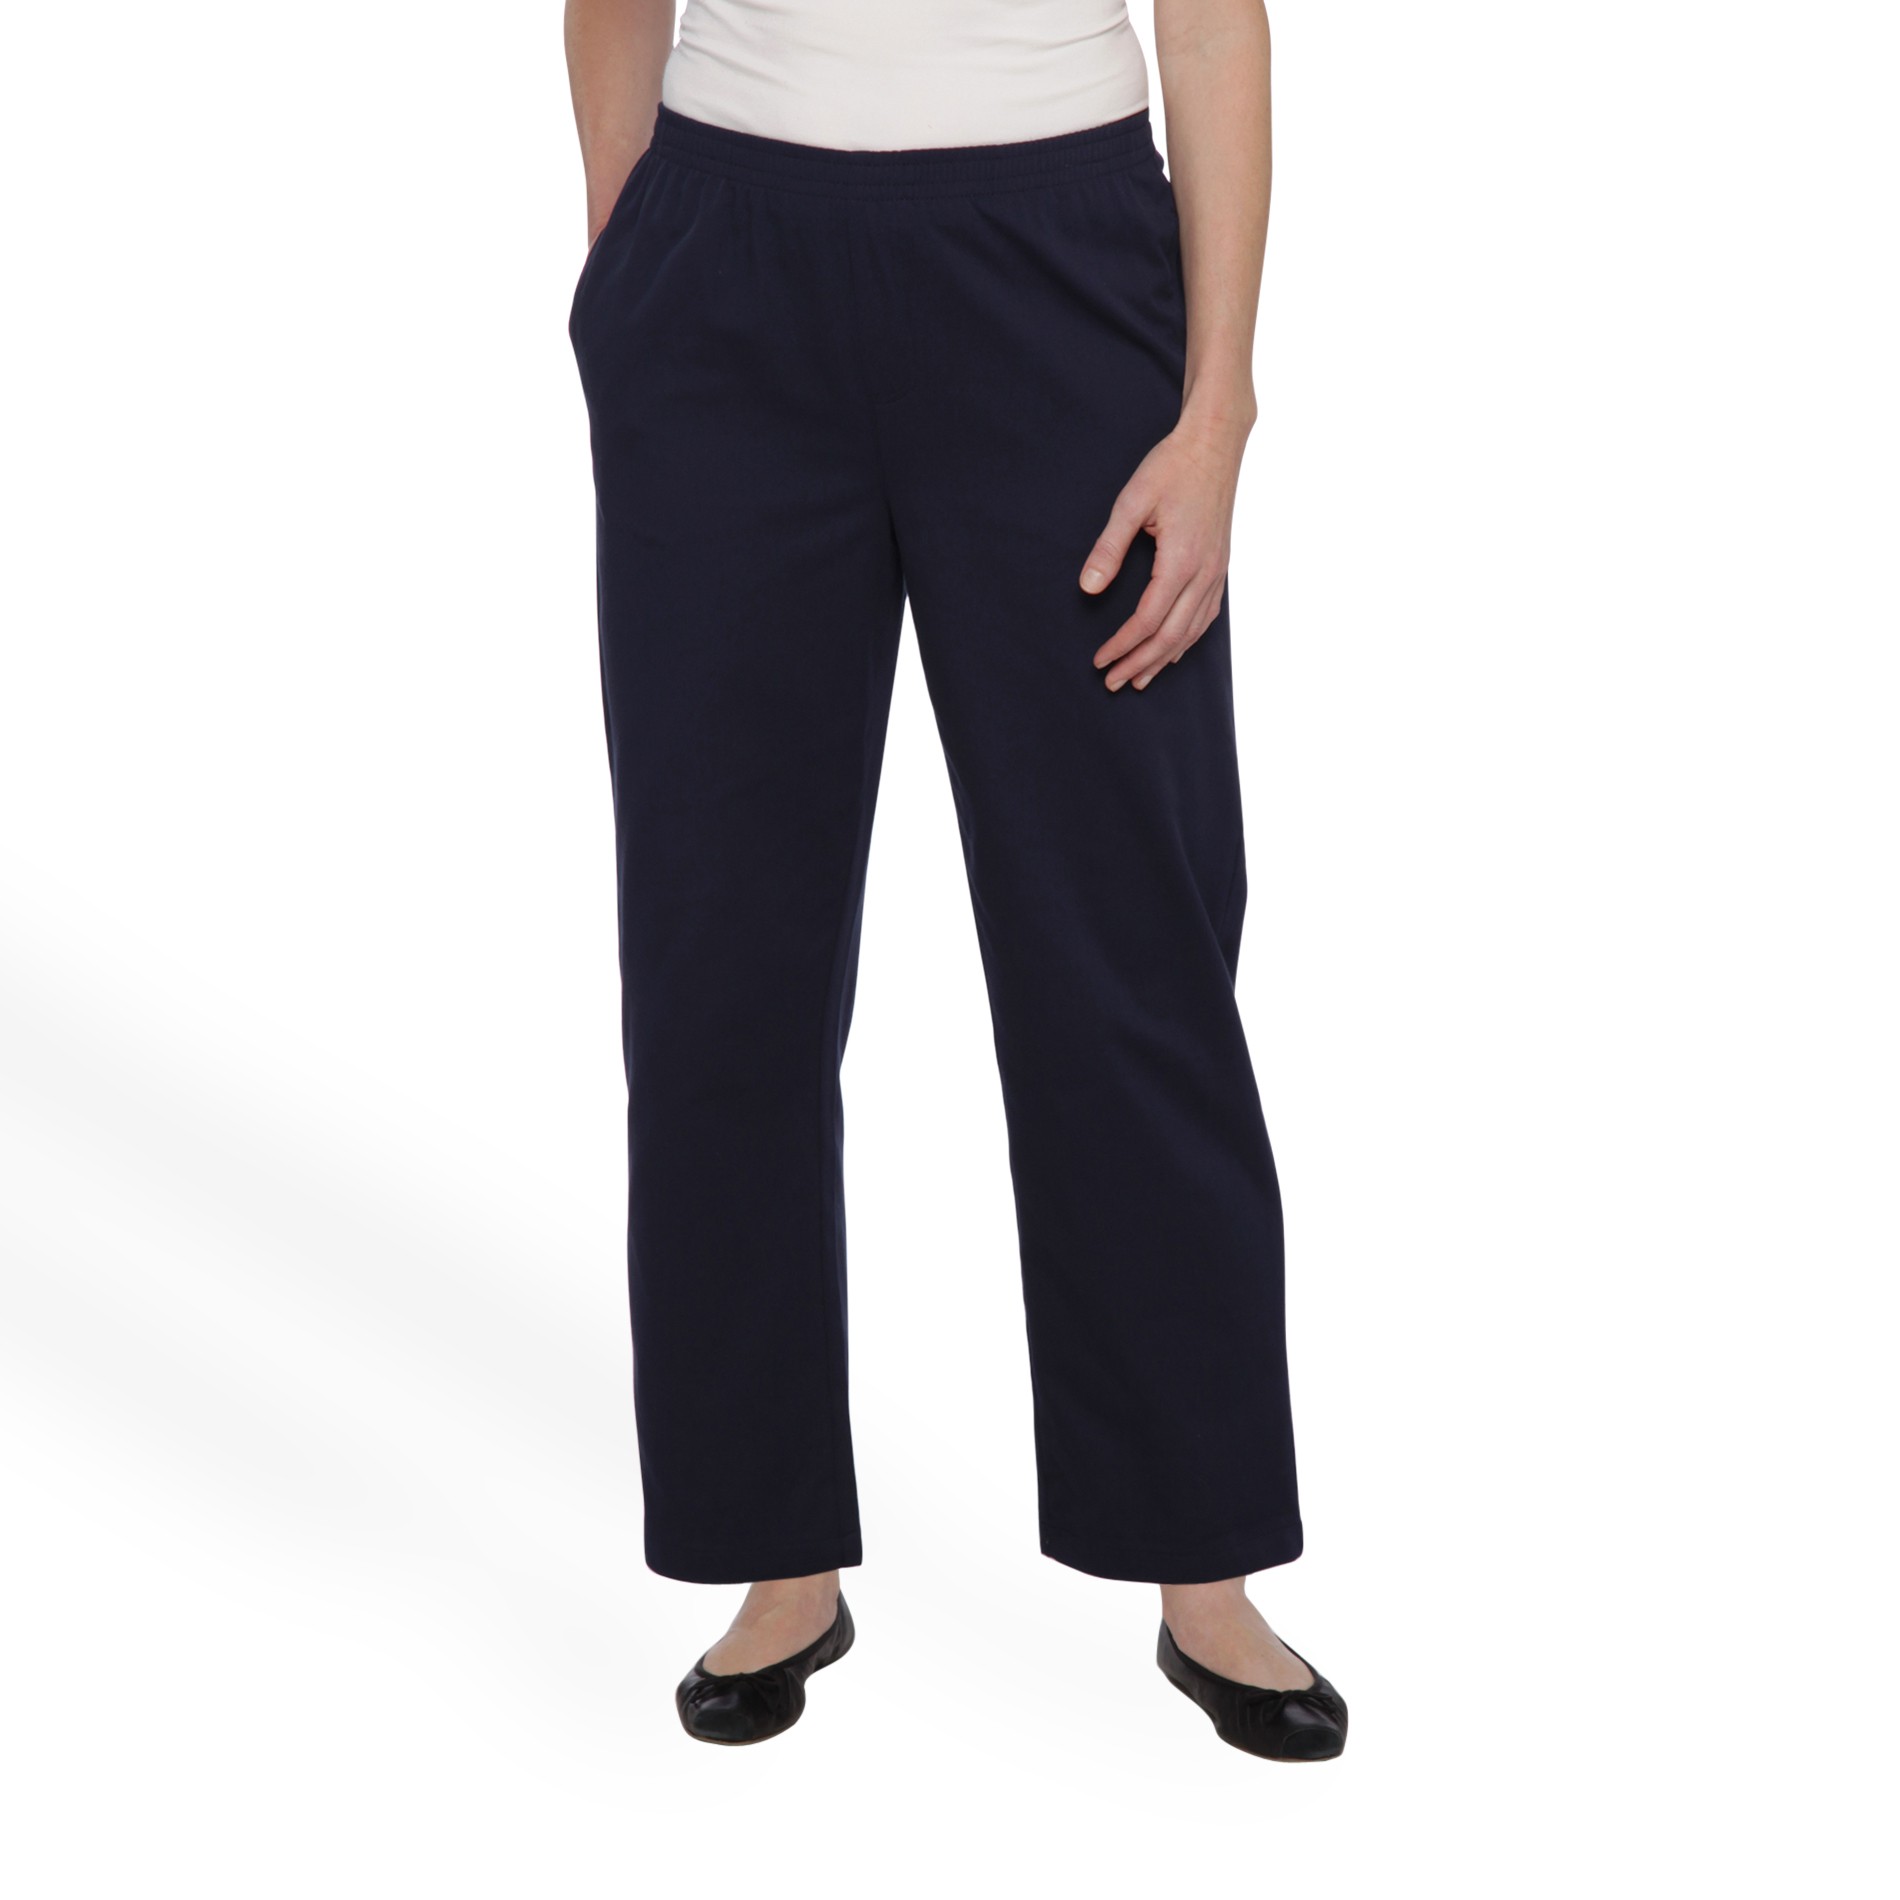 Basic Editions Women's Pull-On Twill Pants